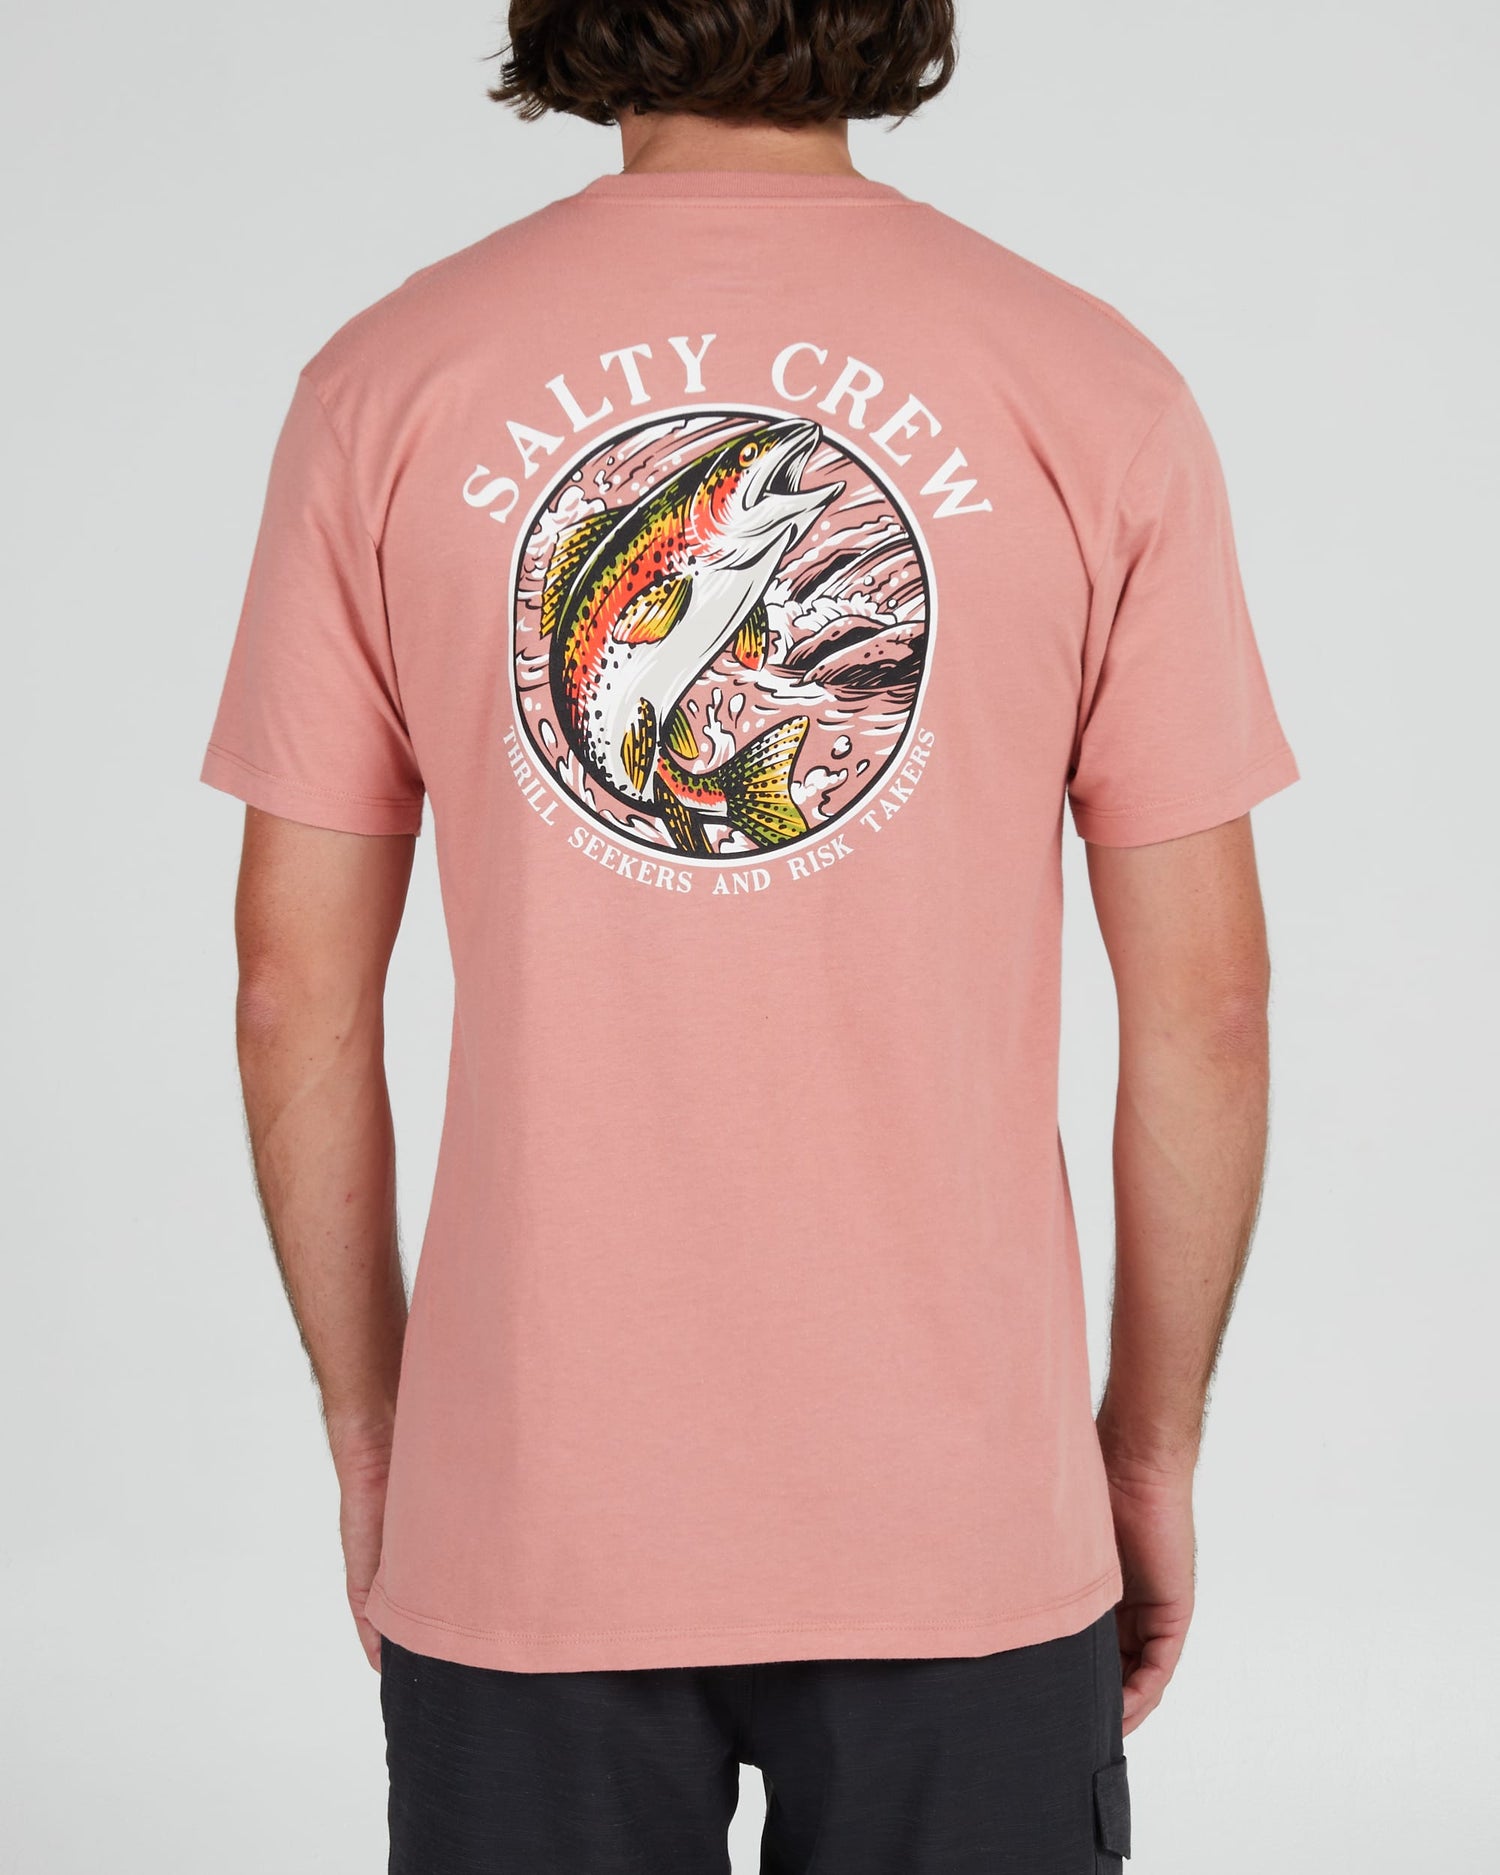 Salty crew T-SHIRTS S/S RAINBOW PREMIUM S/S TEE - CORAL in CORAL